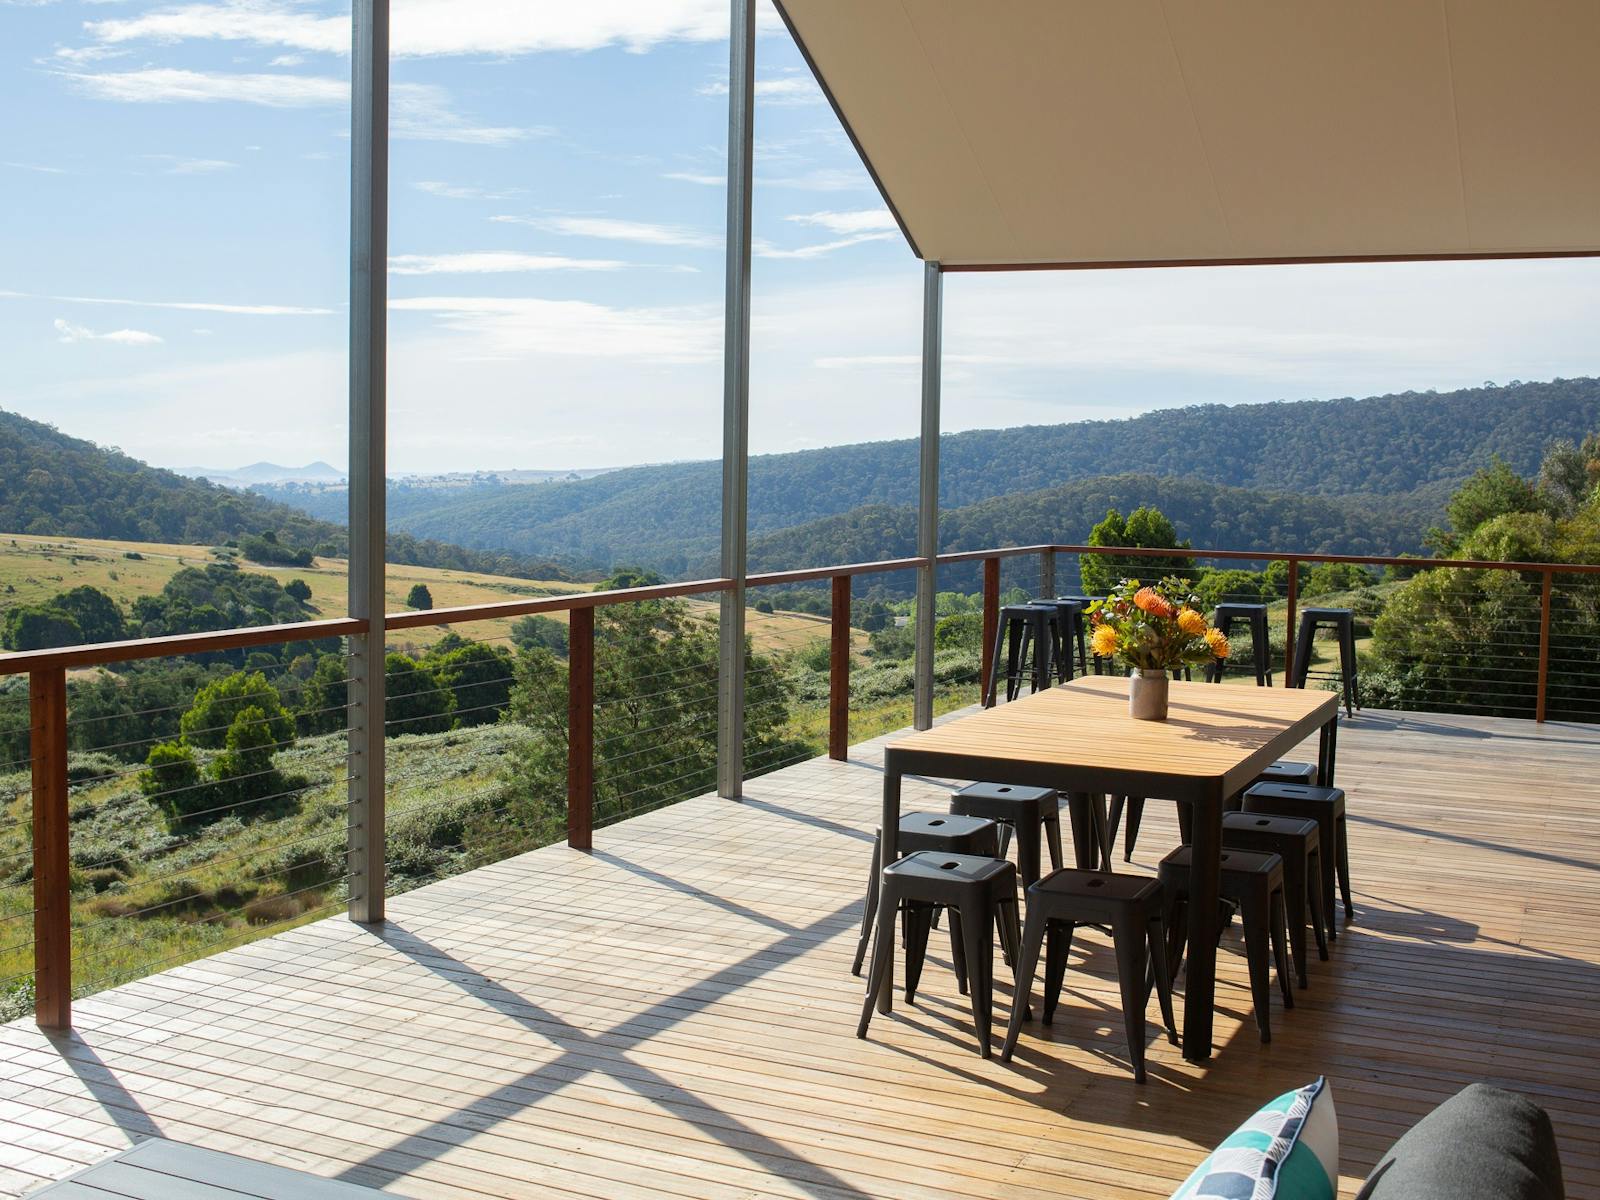 The Deck and the Beautiful View at Wild Fauna.